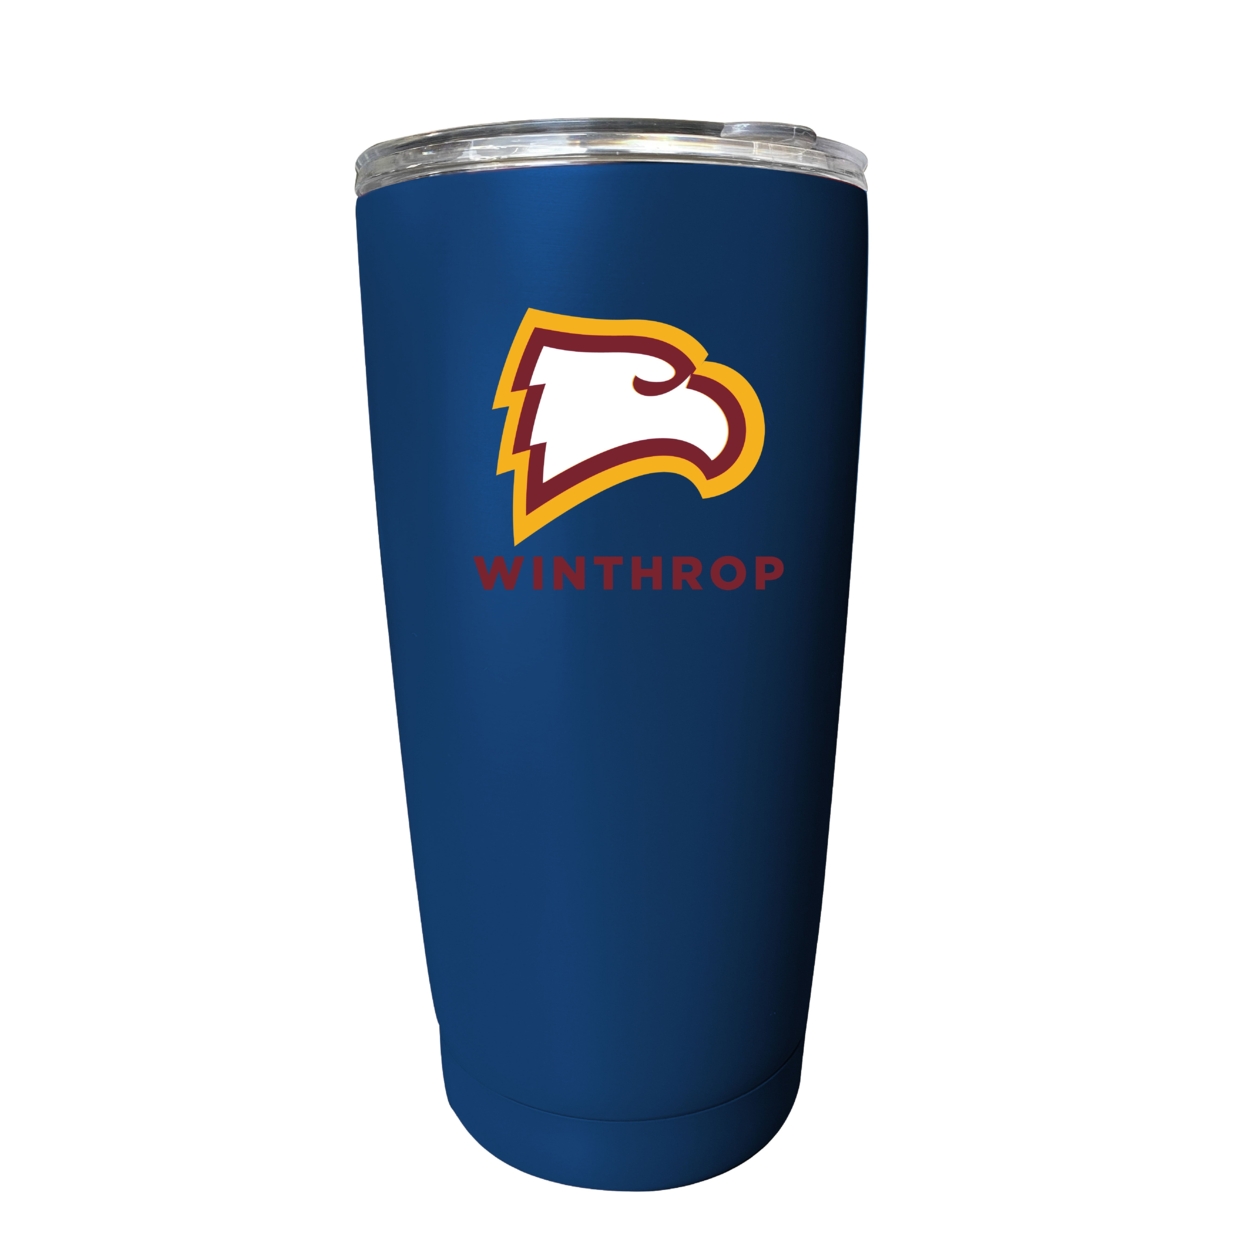 Winthrop University 16 Oz Insulated Stainless Steel Tumblers - Choose Your Color - Navy